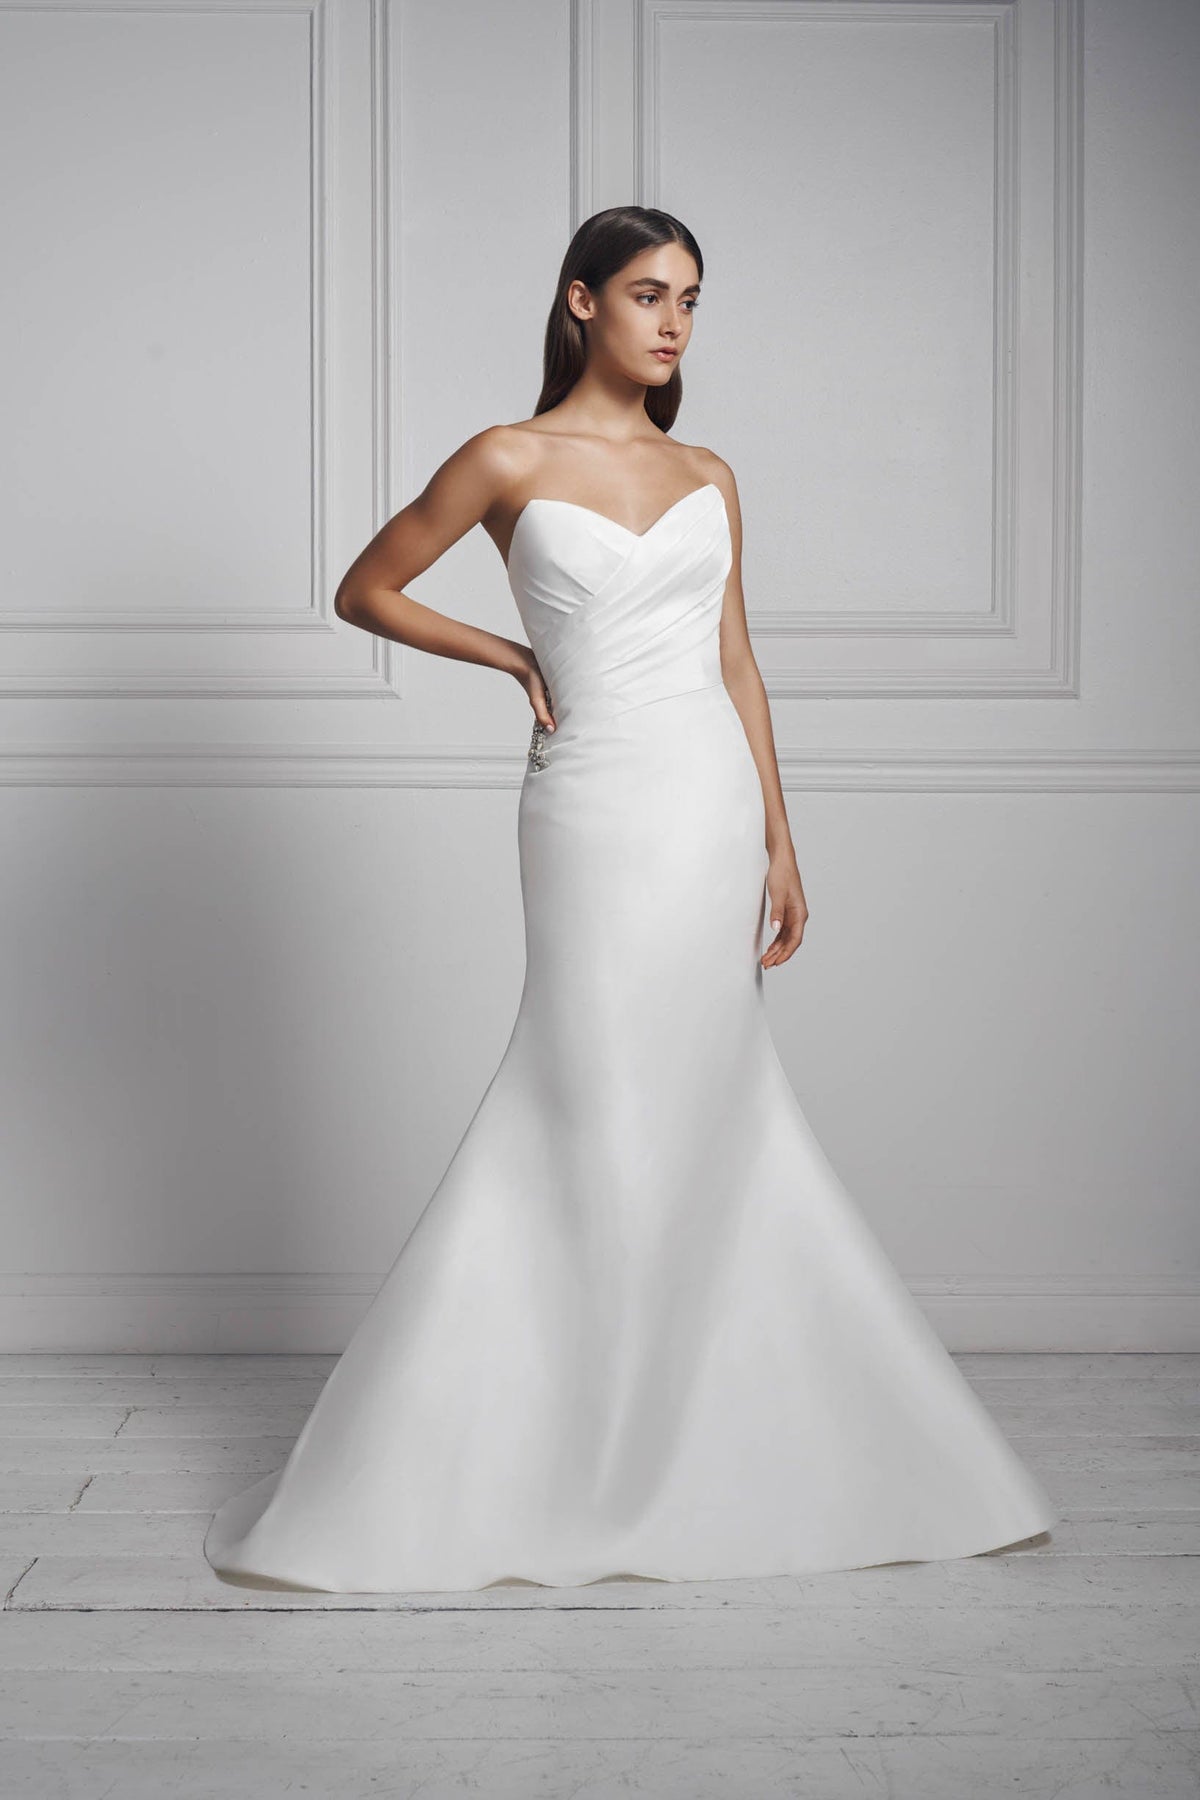 Strapless Sweetheart Neckline A-line Wedding Dress With Embroidery |  Kleinfeld Bridal